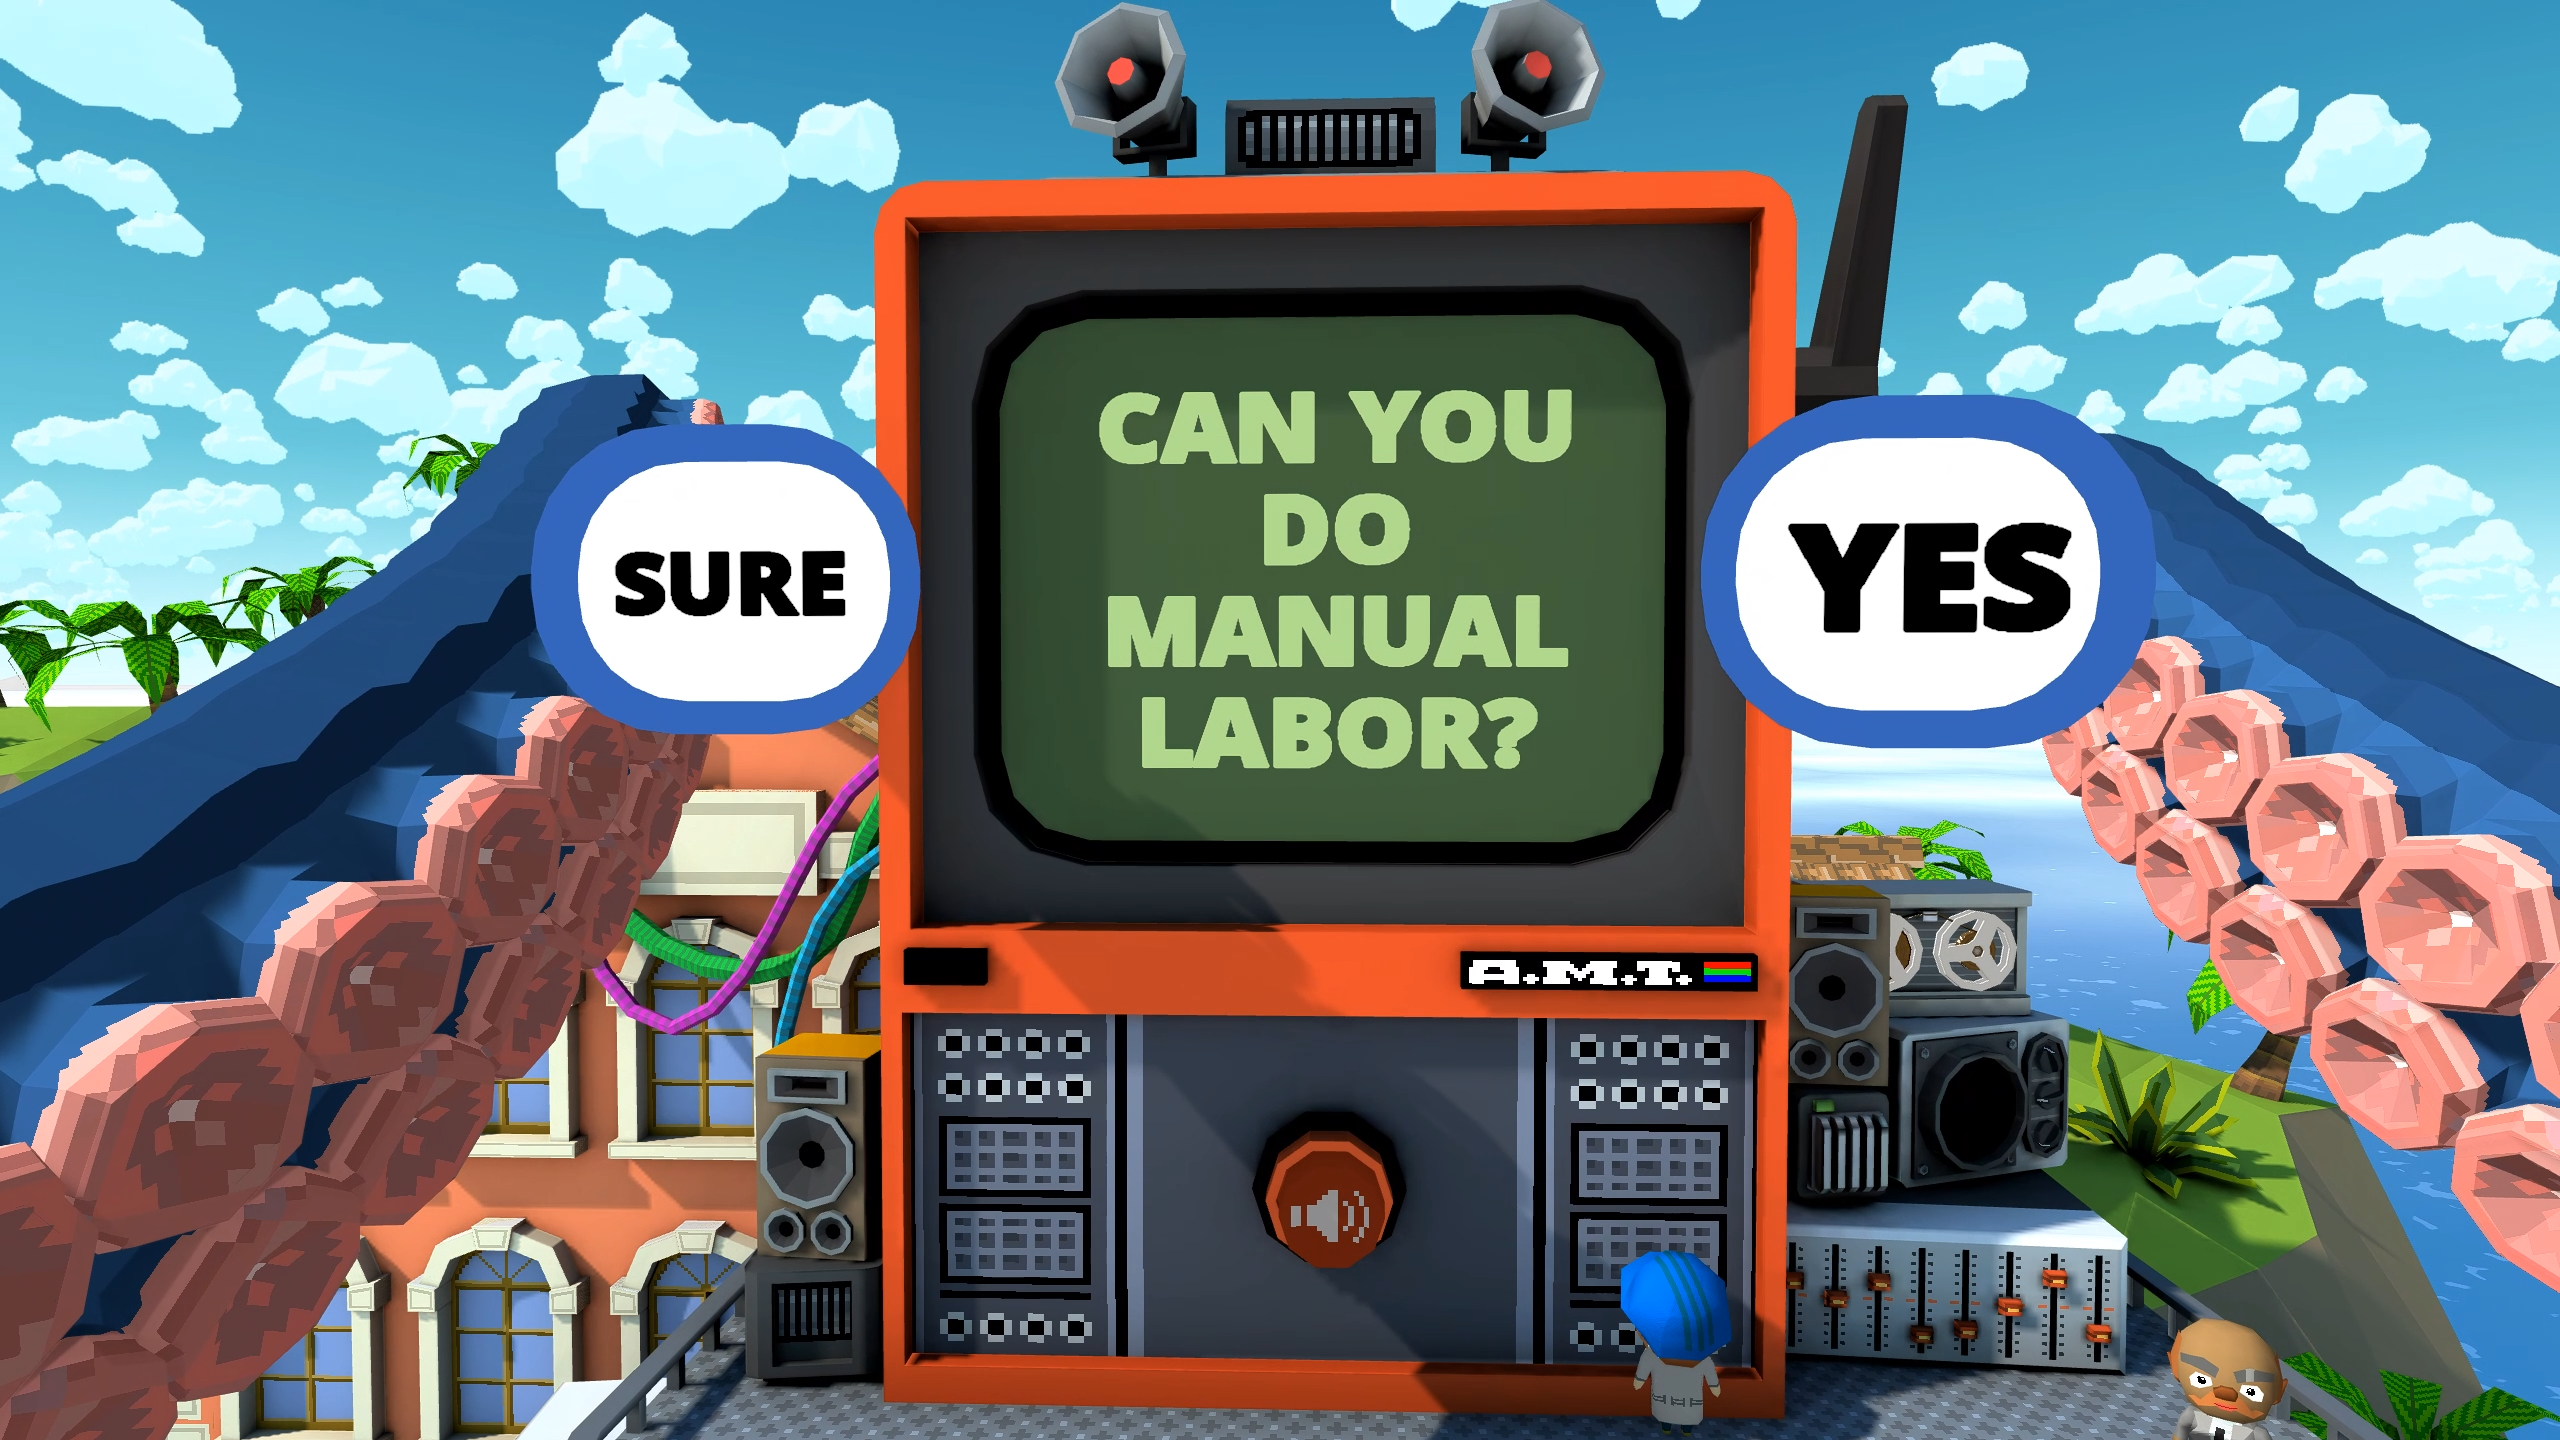 POV of an octopus looking at a TV asking if they can do manual labor, with the only two options being "Sure" and "Yes"